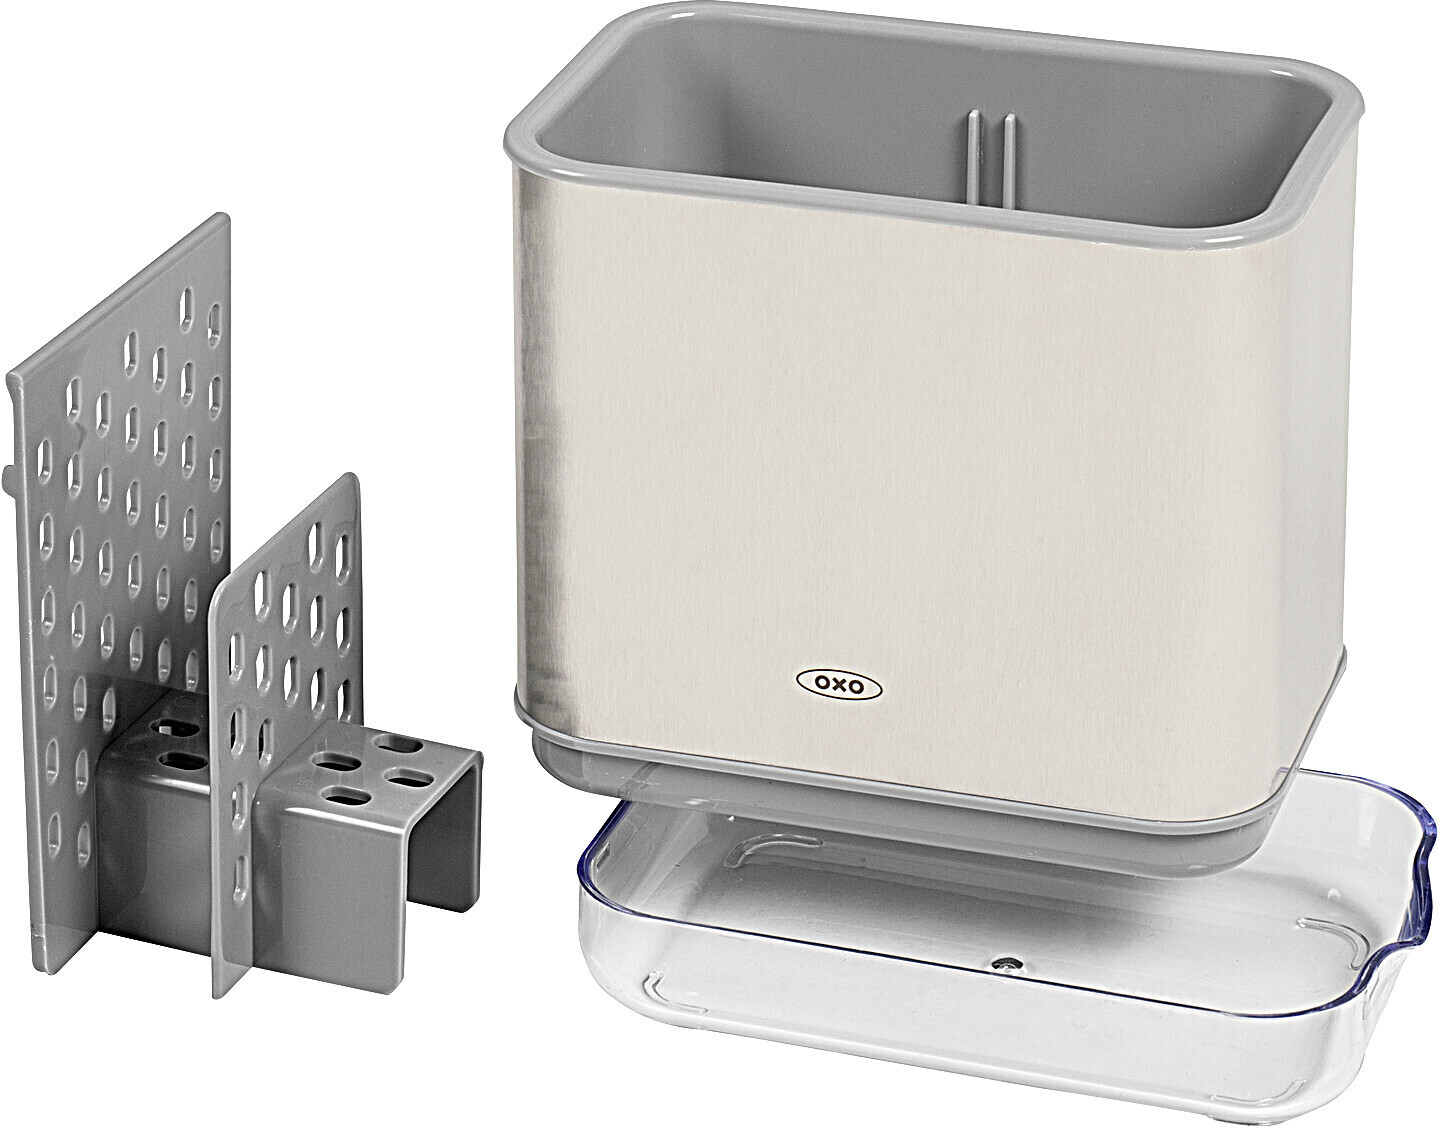 OXO Good Grips Stainless Steel Sink Caddy, Gray